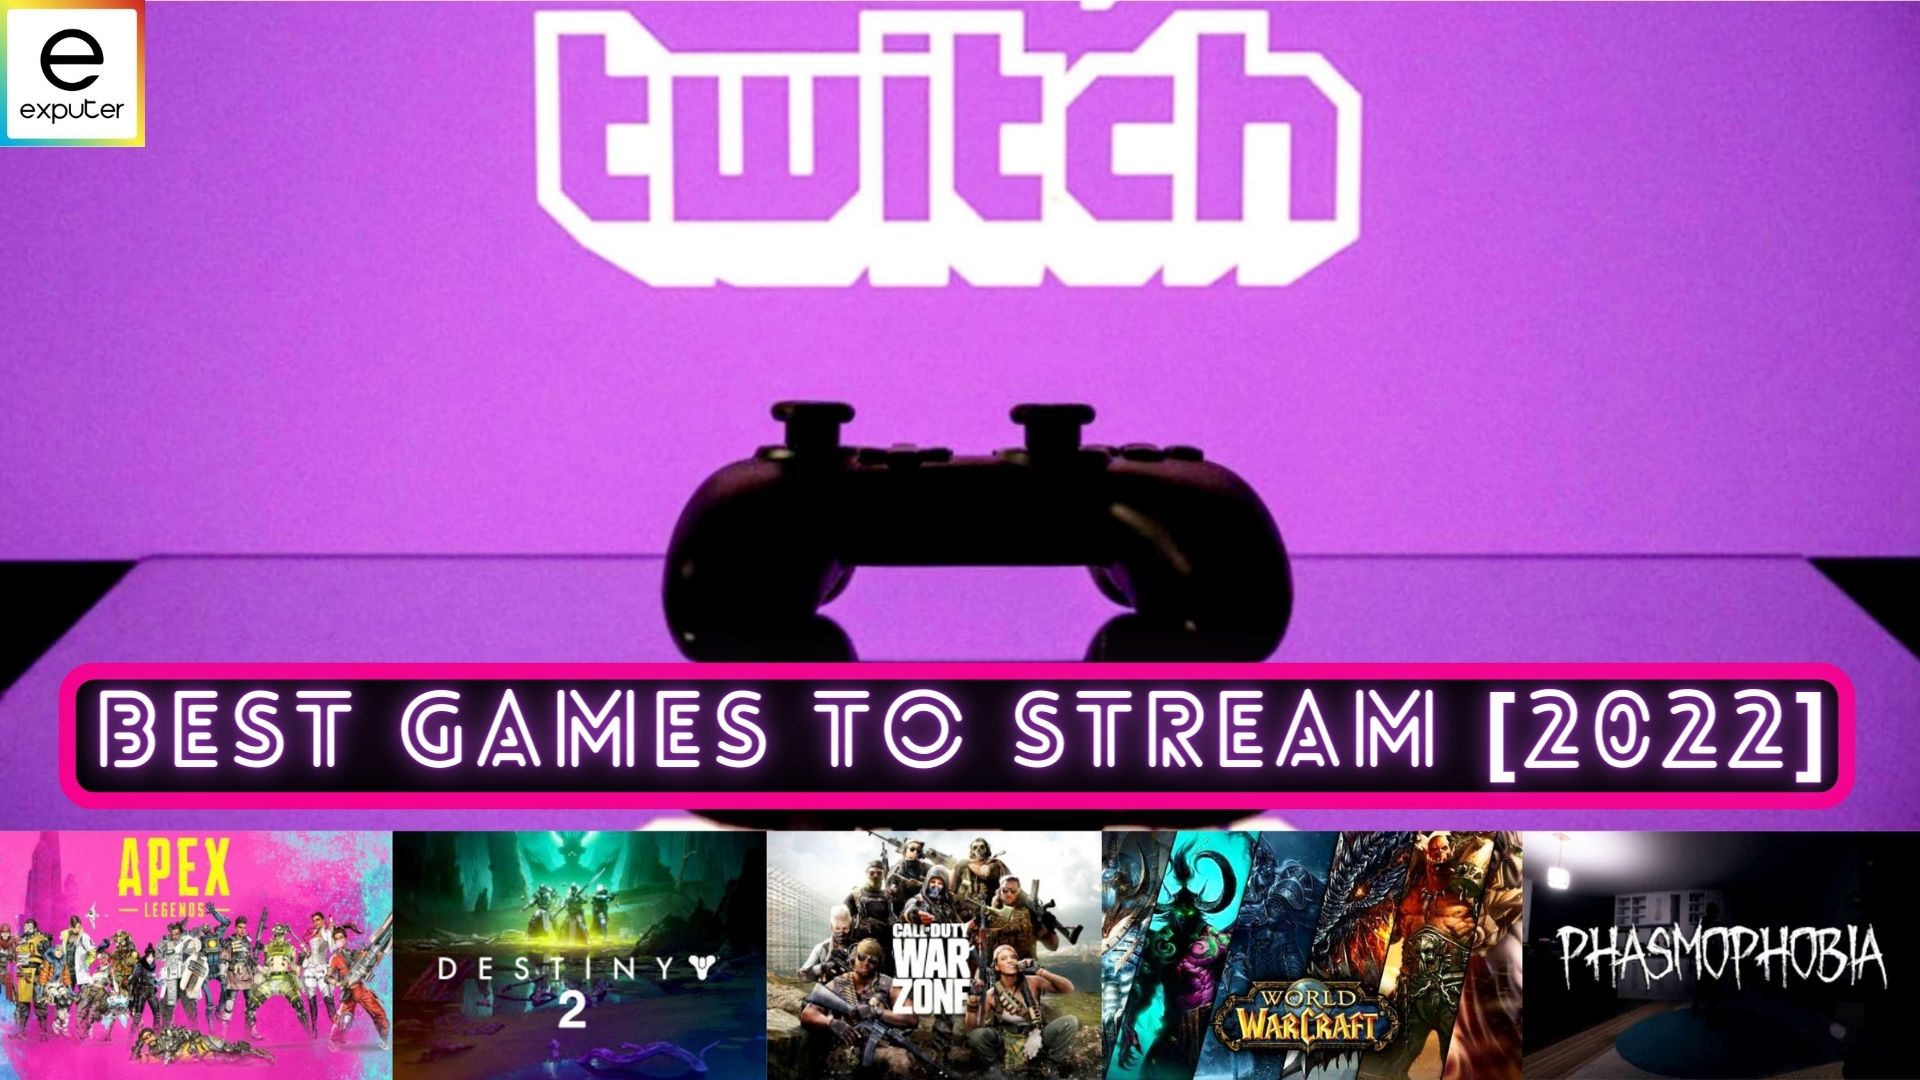 What are the Top 5 Games You can Stream on Twitch?